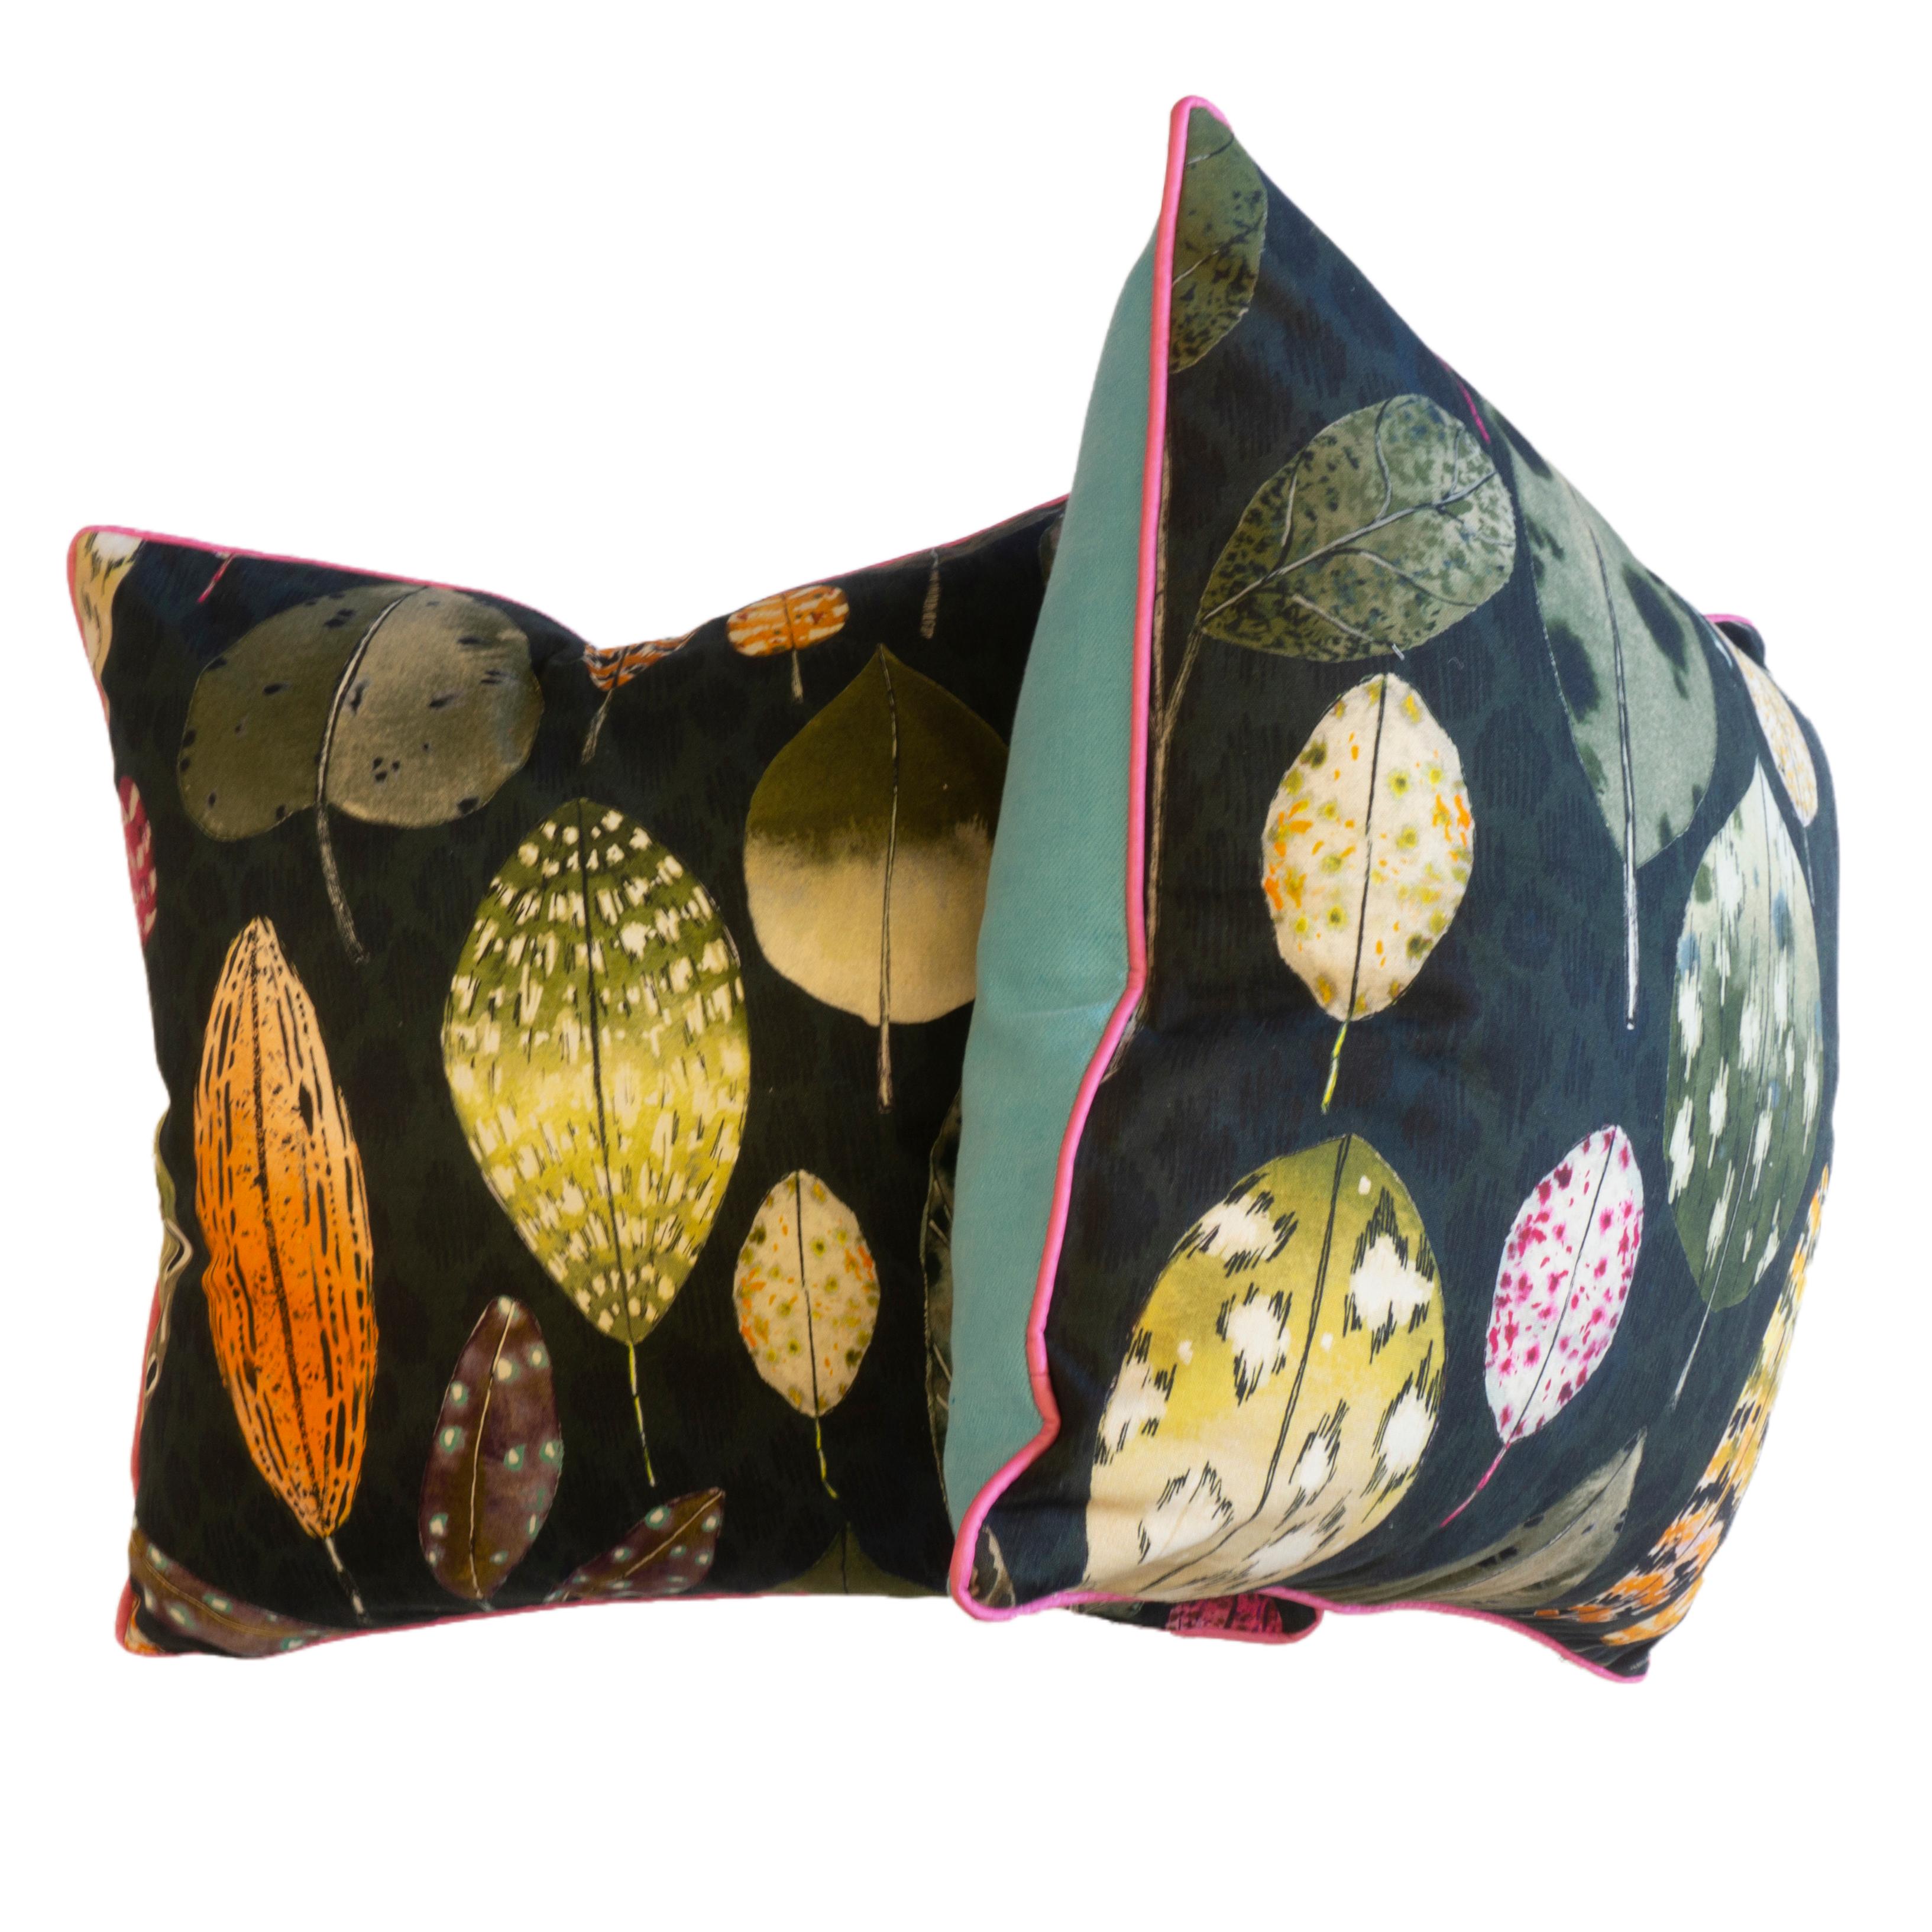 Escape into nature with the painted leaves throw pillows. Made with designer Guild’s Tulsi Aubergine fabric that features a highly ornate leaf print design on soft brushed cotton cloth. Bordered in pink piping and green/blue backing. All pillows are